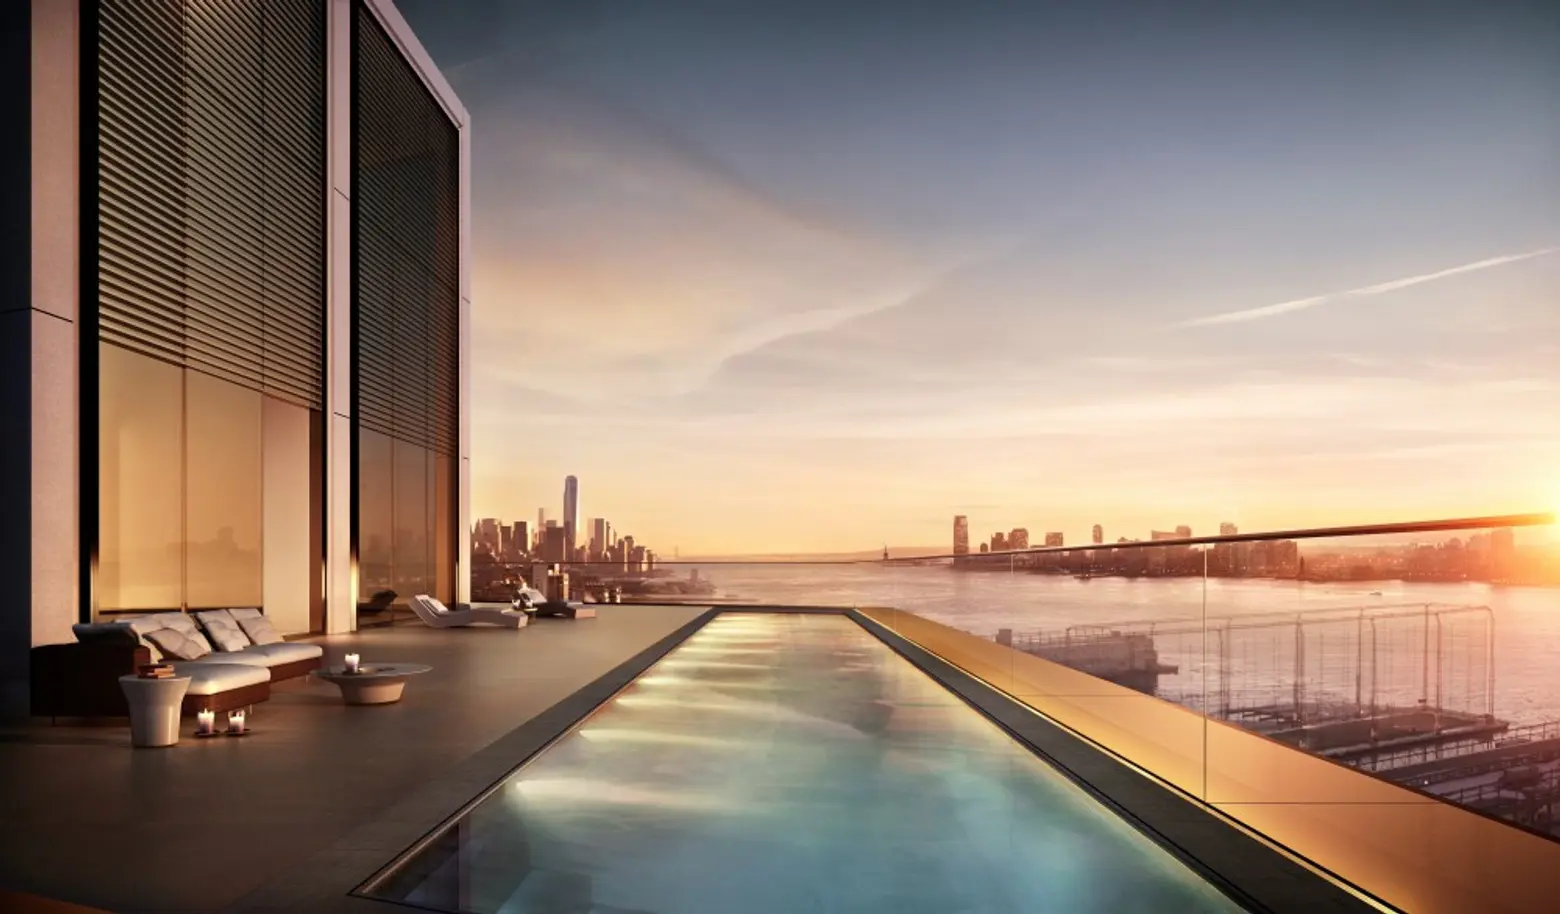 551w21 penthouse pool, 551w21, 551w21 penthouse, norman foster nyc